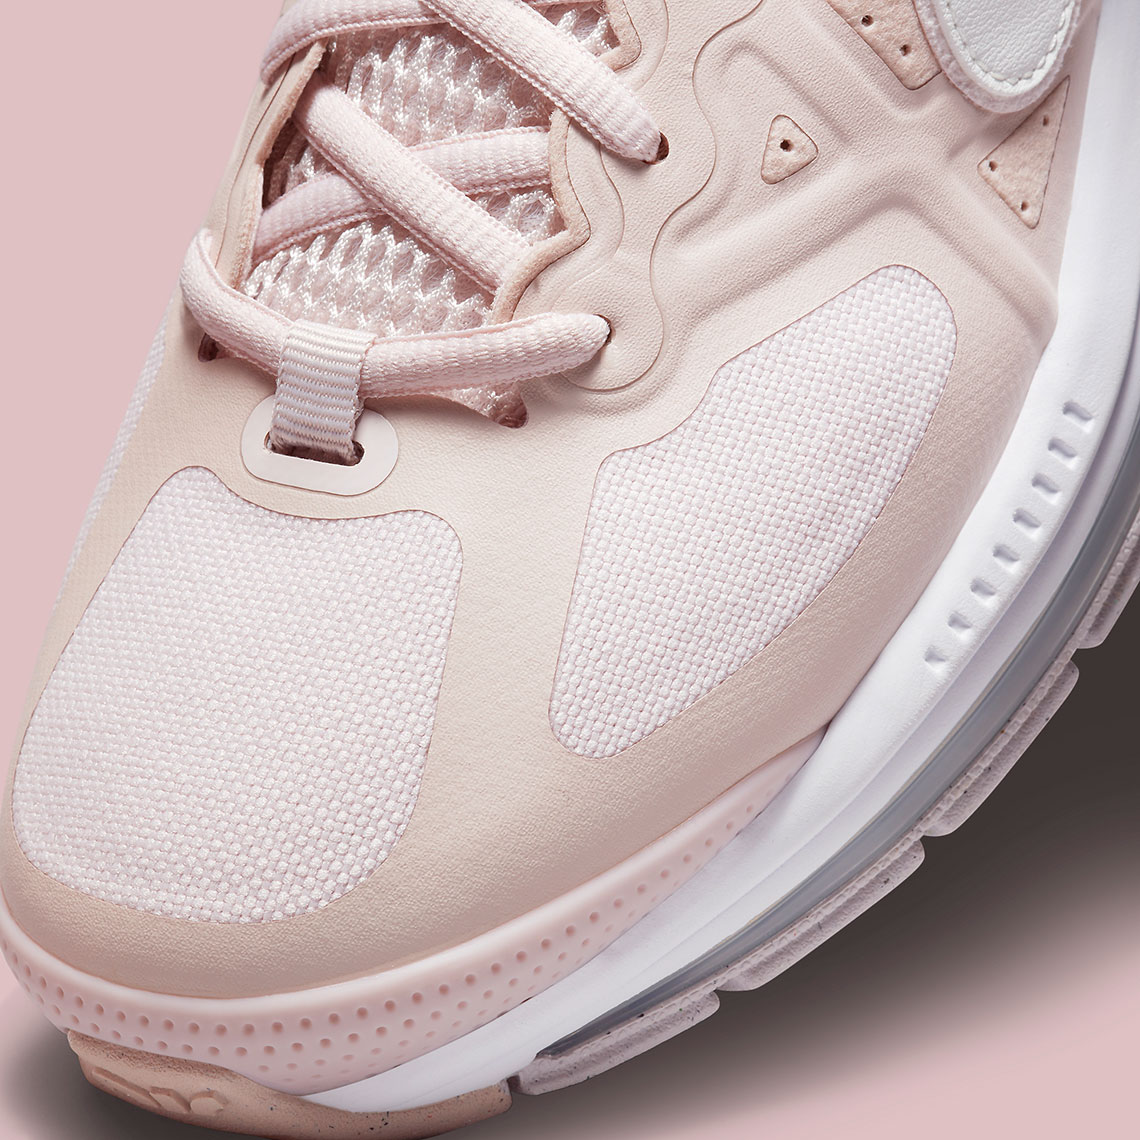 nike air max genome wmns barely rose pink oxford white summit white DJ3893 600 5